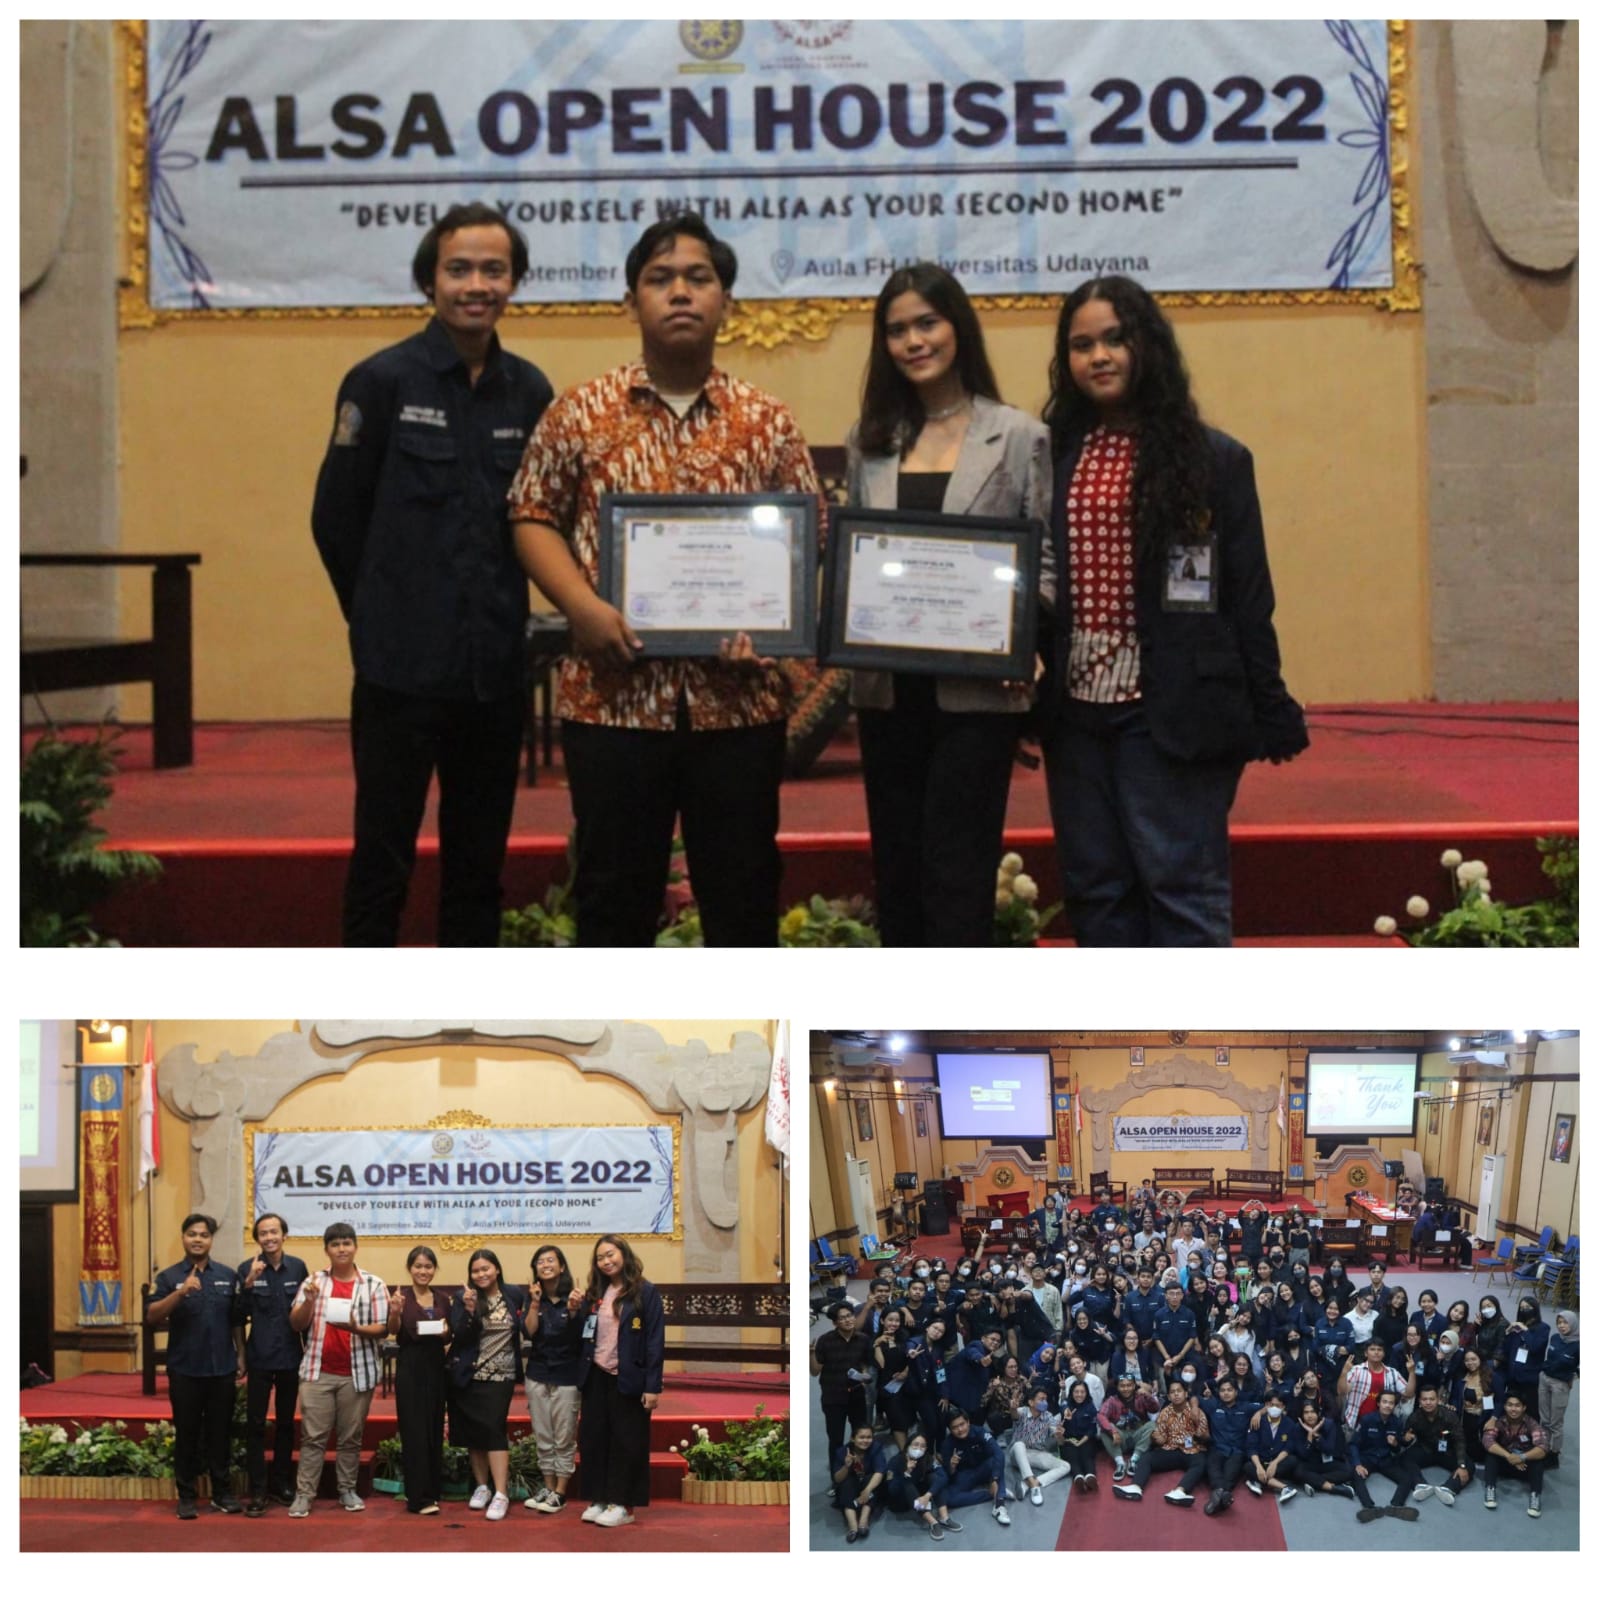 ALSA LOCAL CHAPTER UNUD OPEN HOUSE 2022